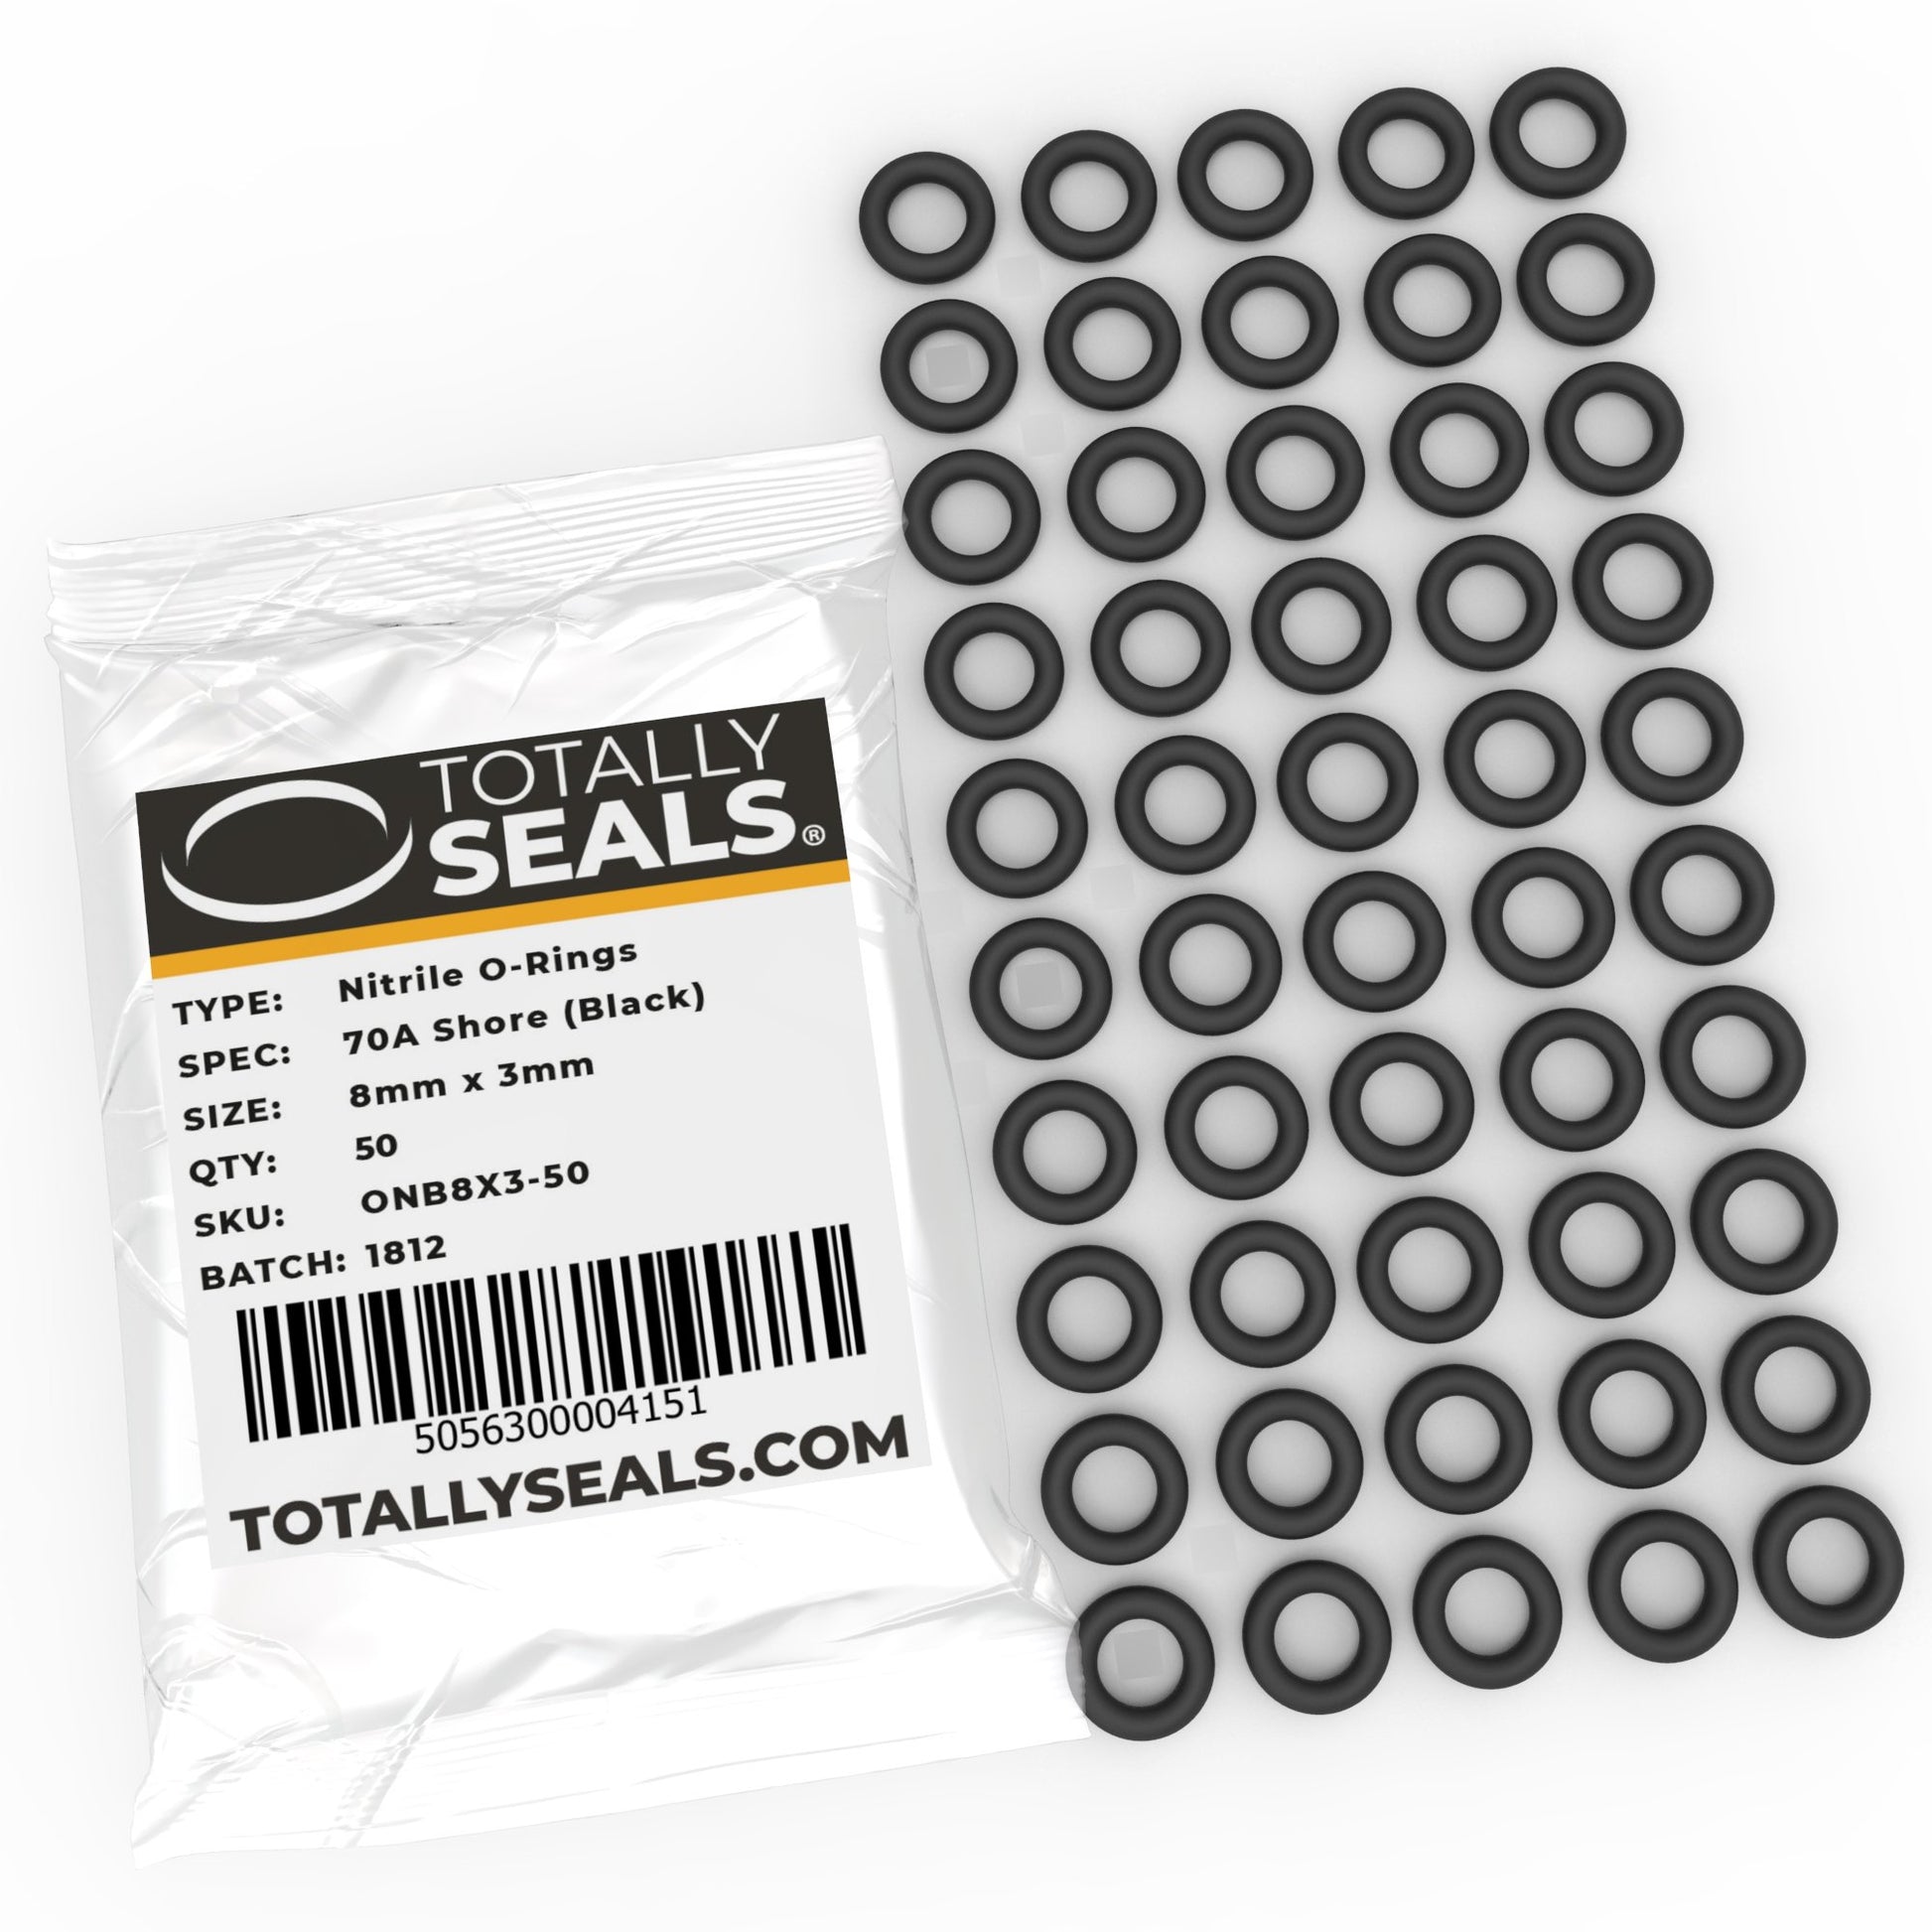 8mm x 3mm (14mm OD) Nitrile O-Rings - Totally Seals®